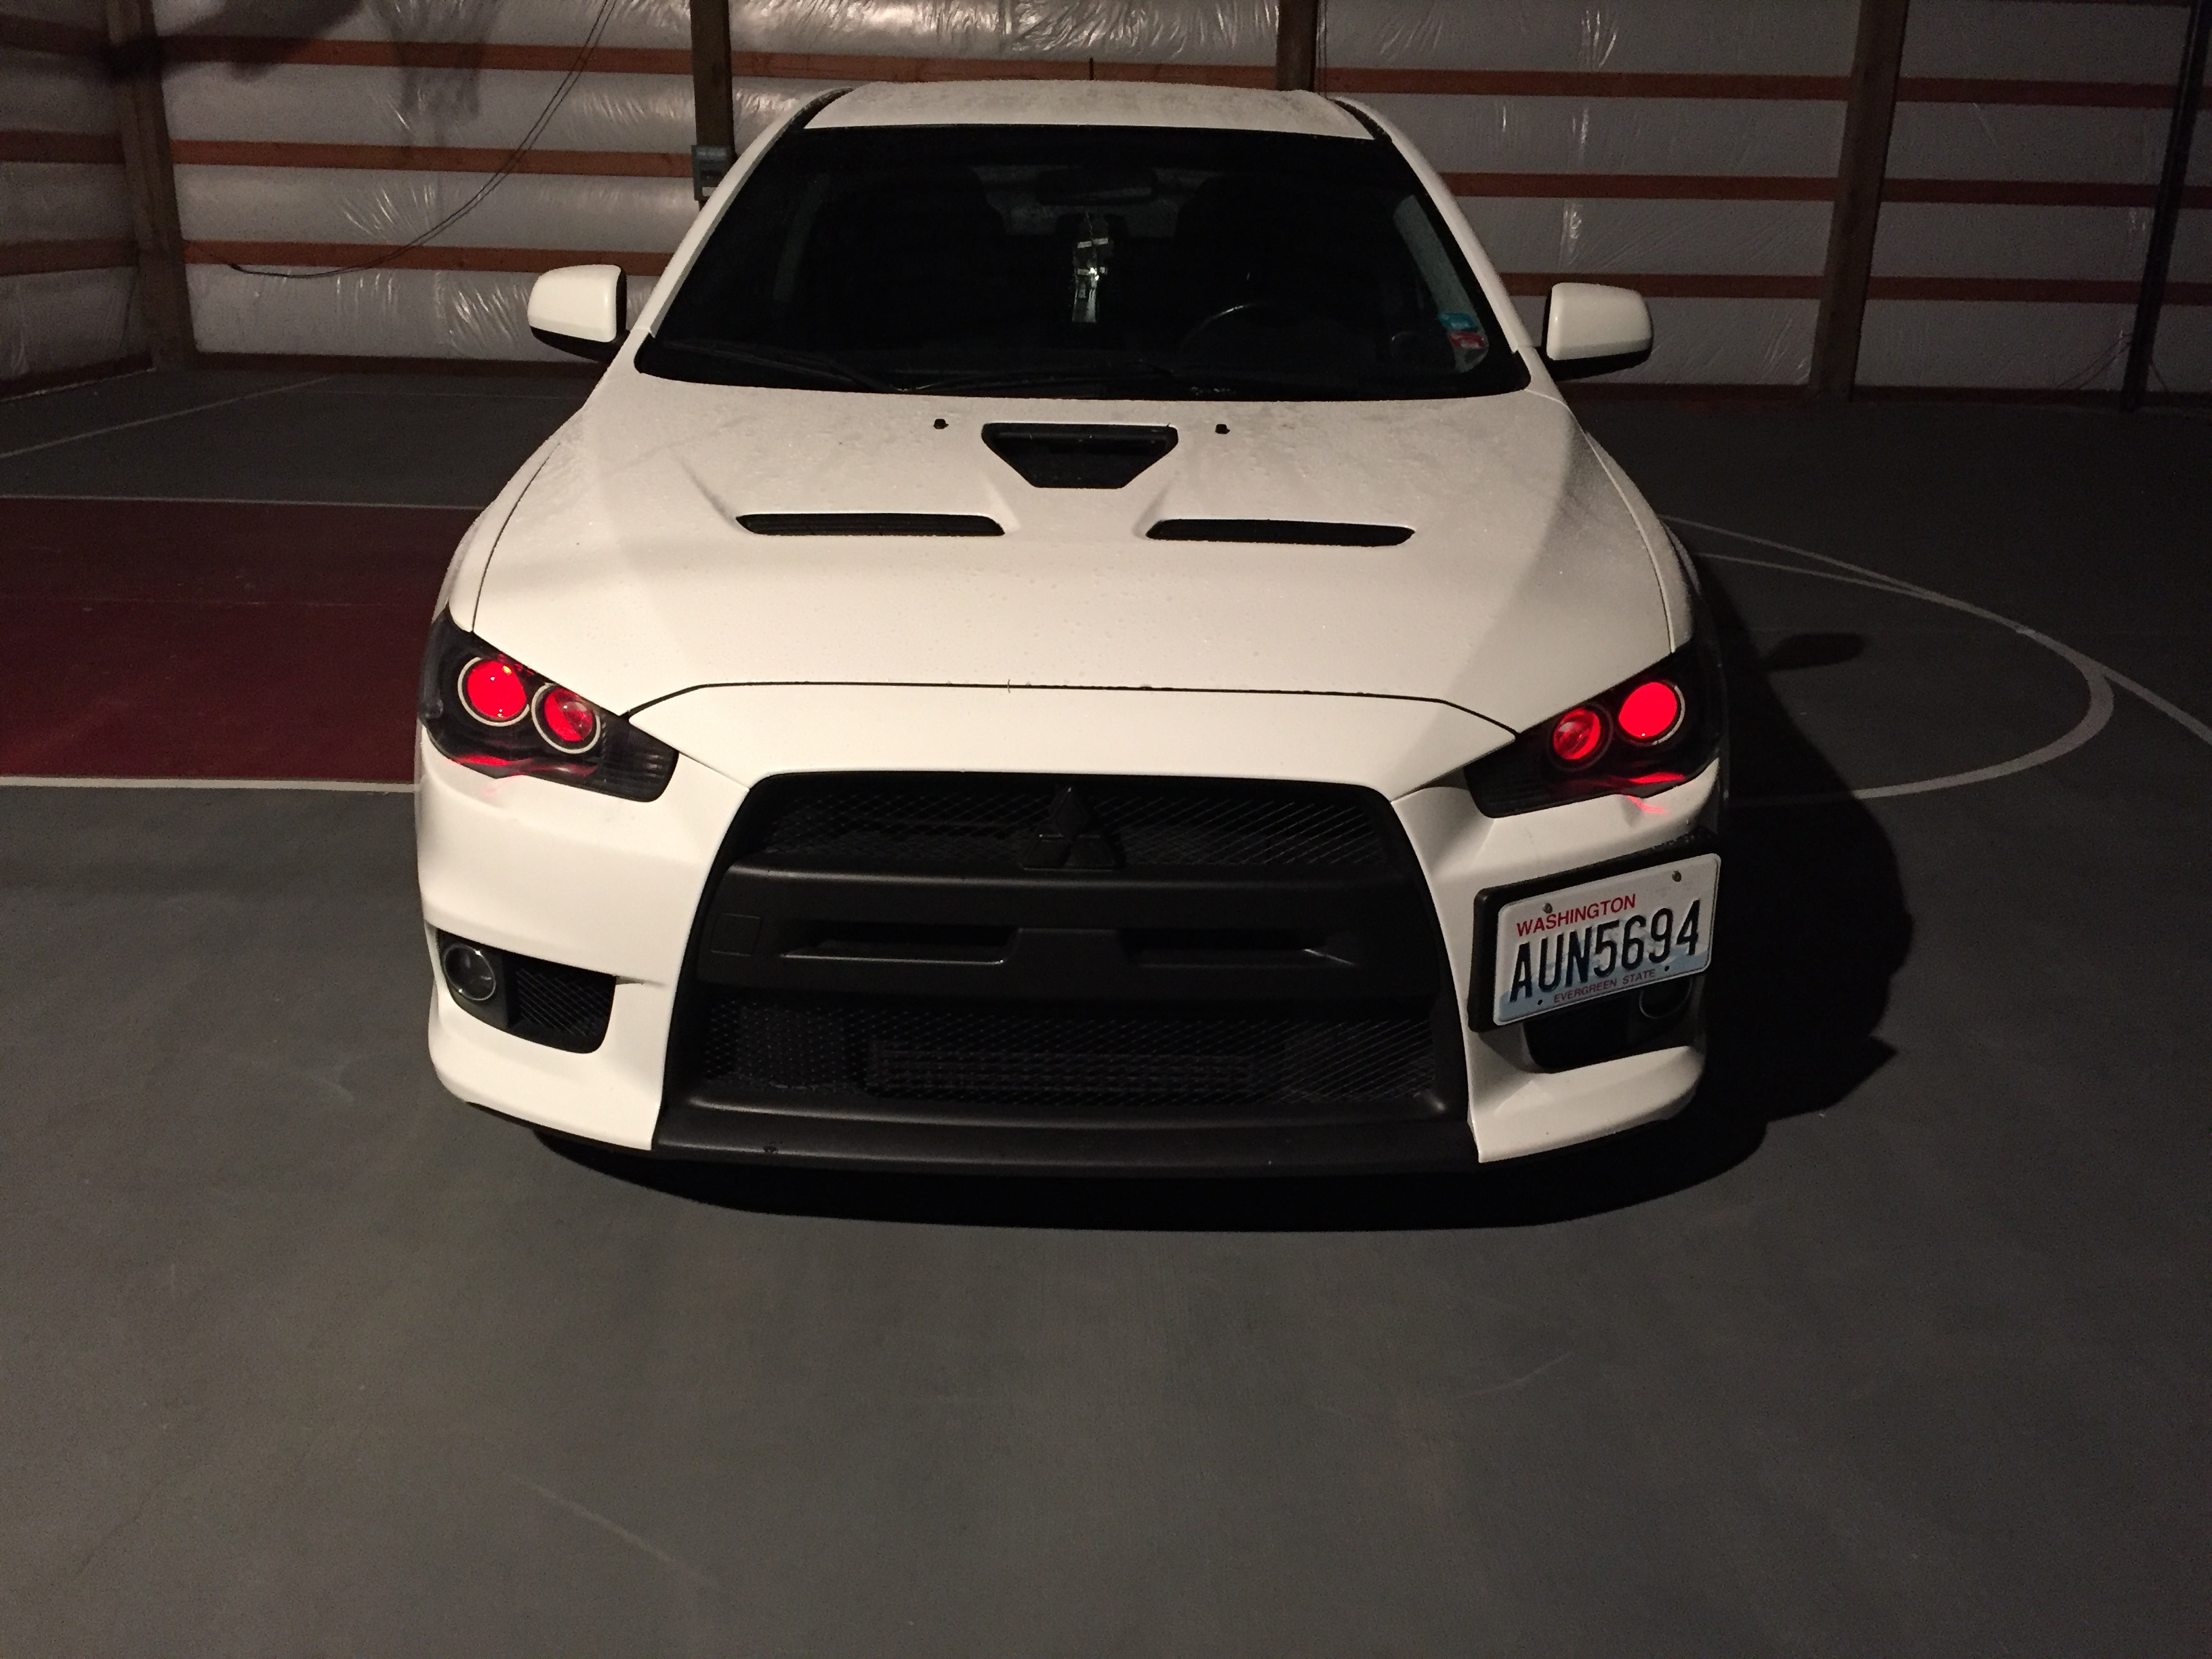 Official Wicked White Evo X Picture Thread - Page 215 - EvolutionM